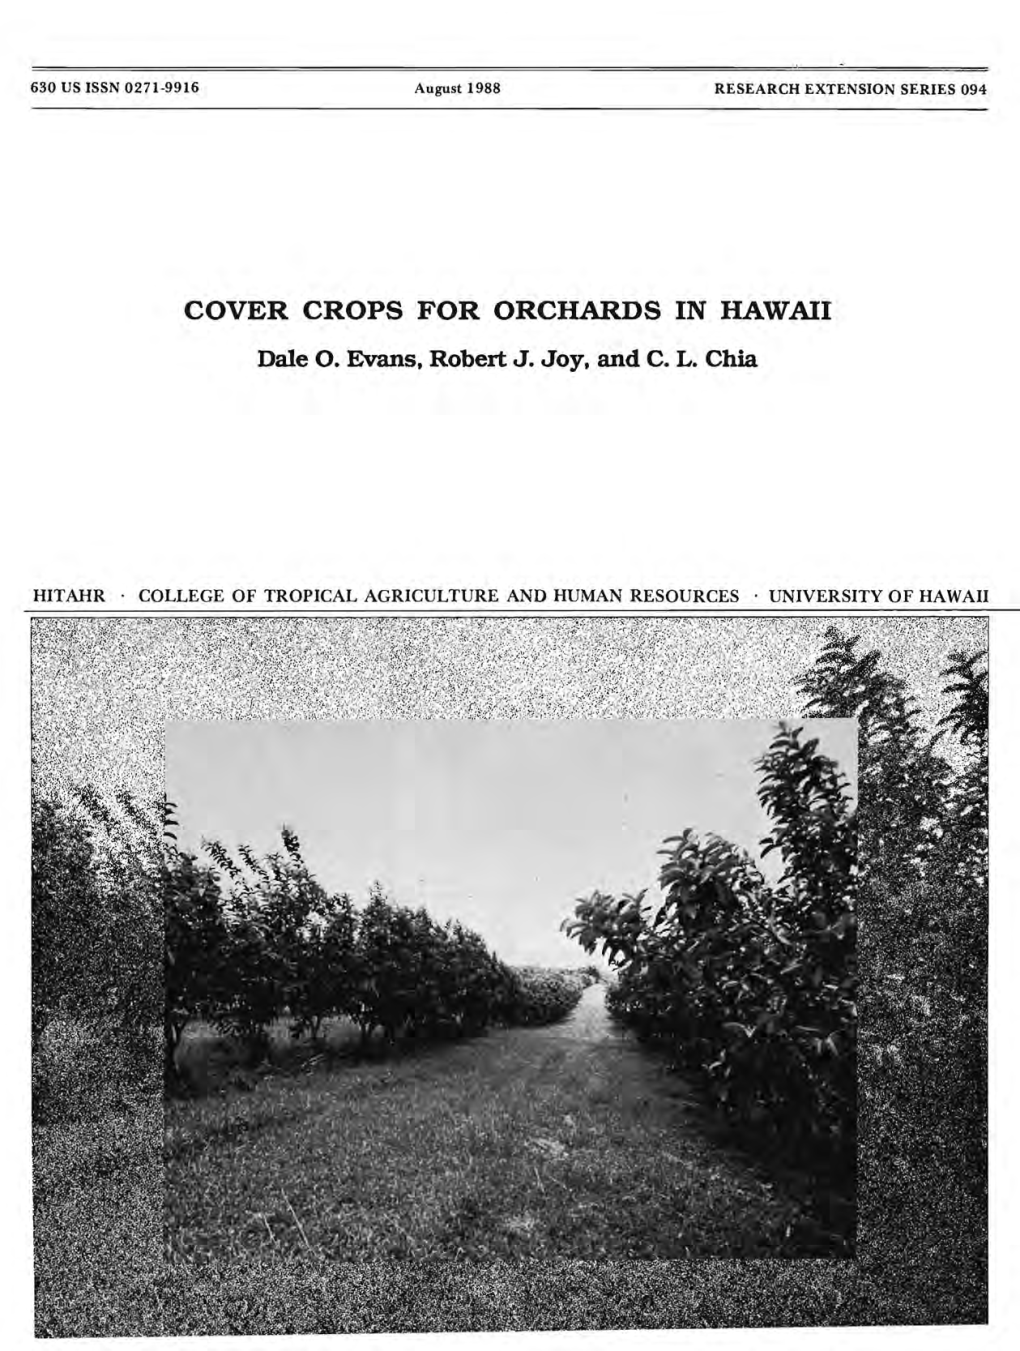 Cover Crops for Orchards in Hawaii